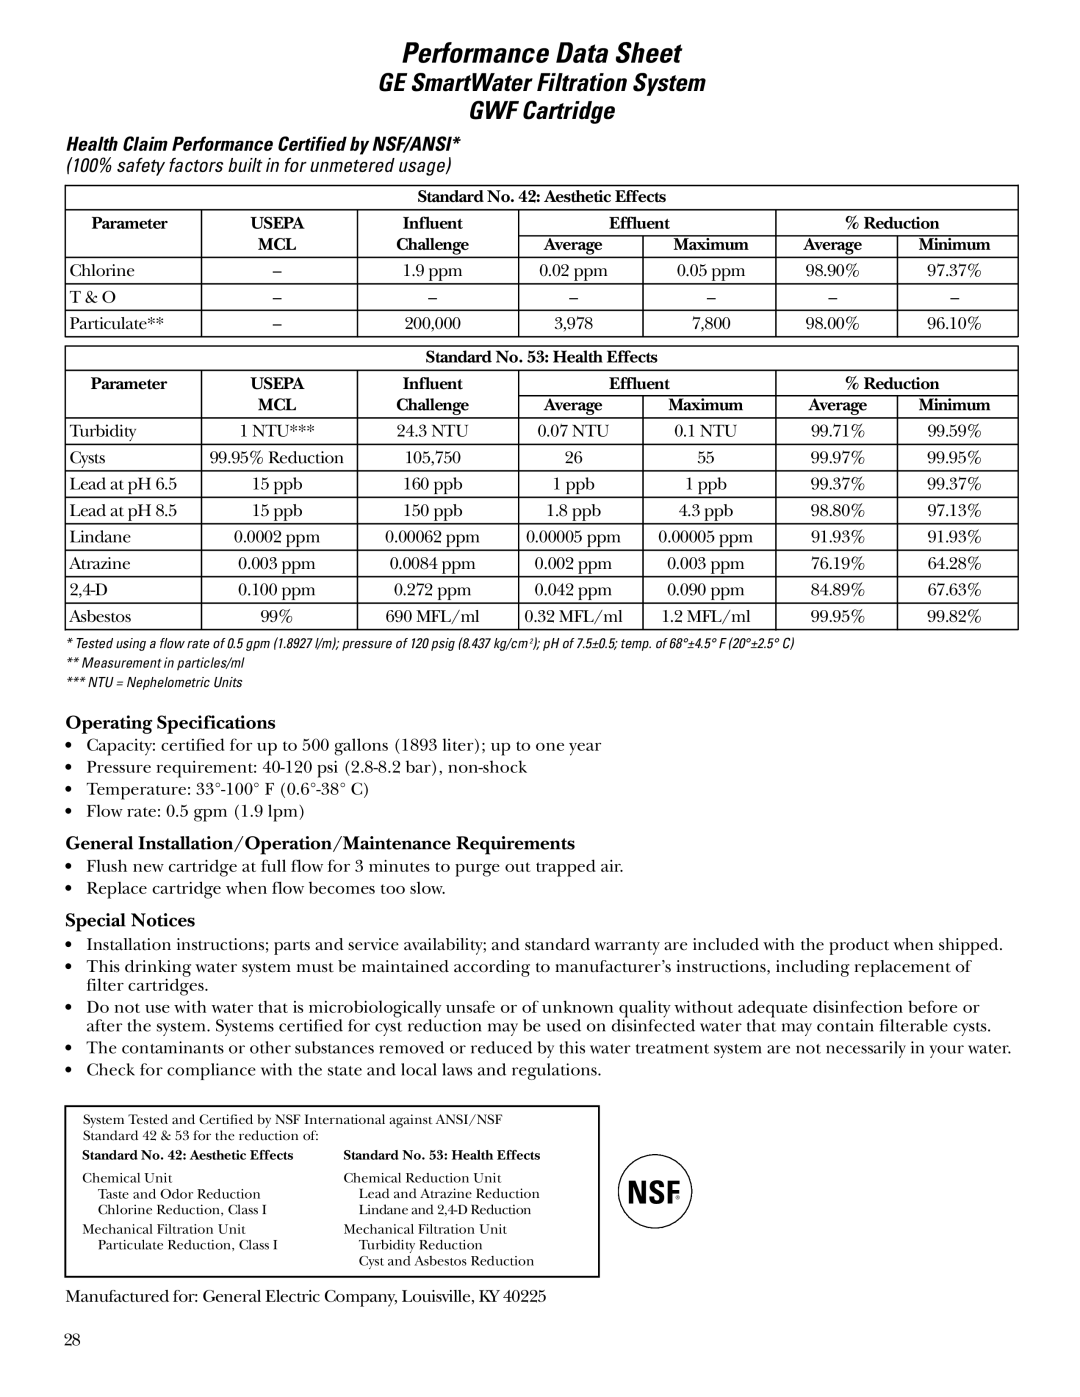 GE r10965v-1 owner manual Operating Specifications, Special Notices, Performance Data Sheet 